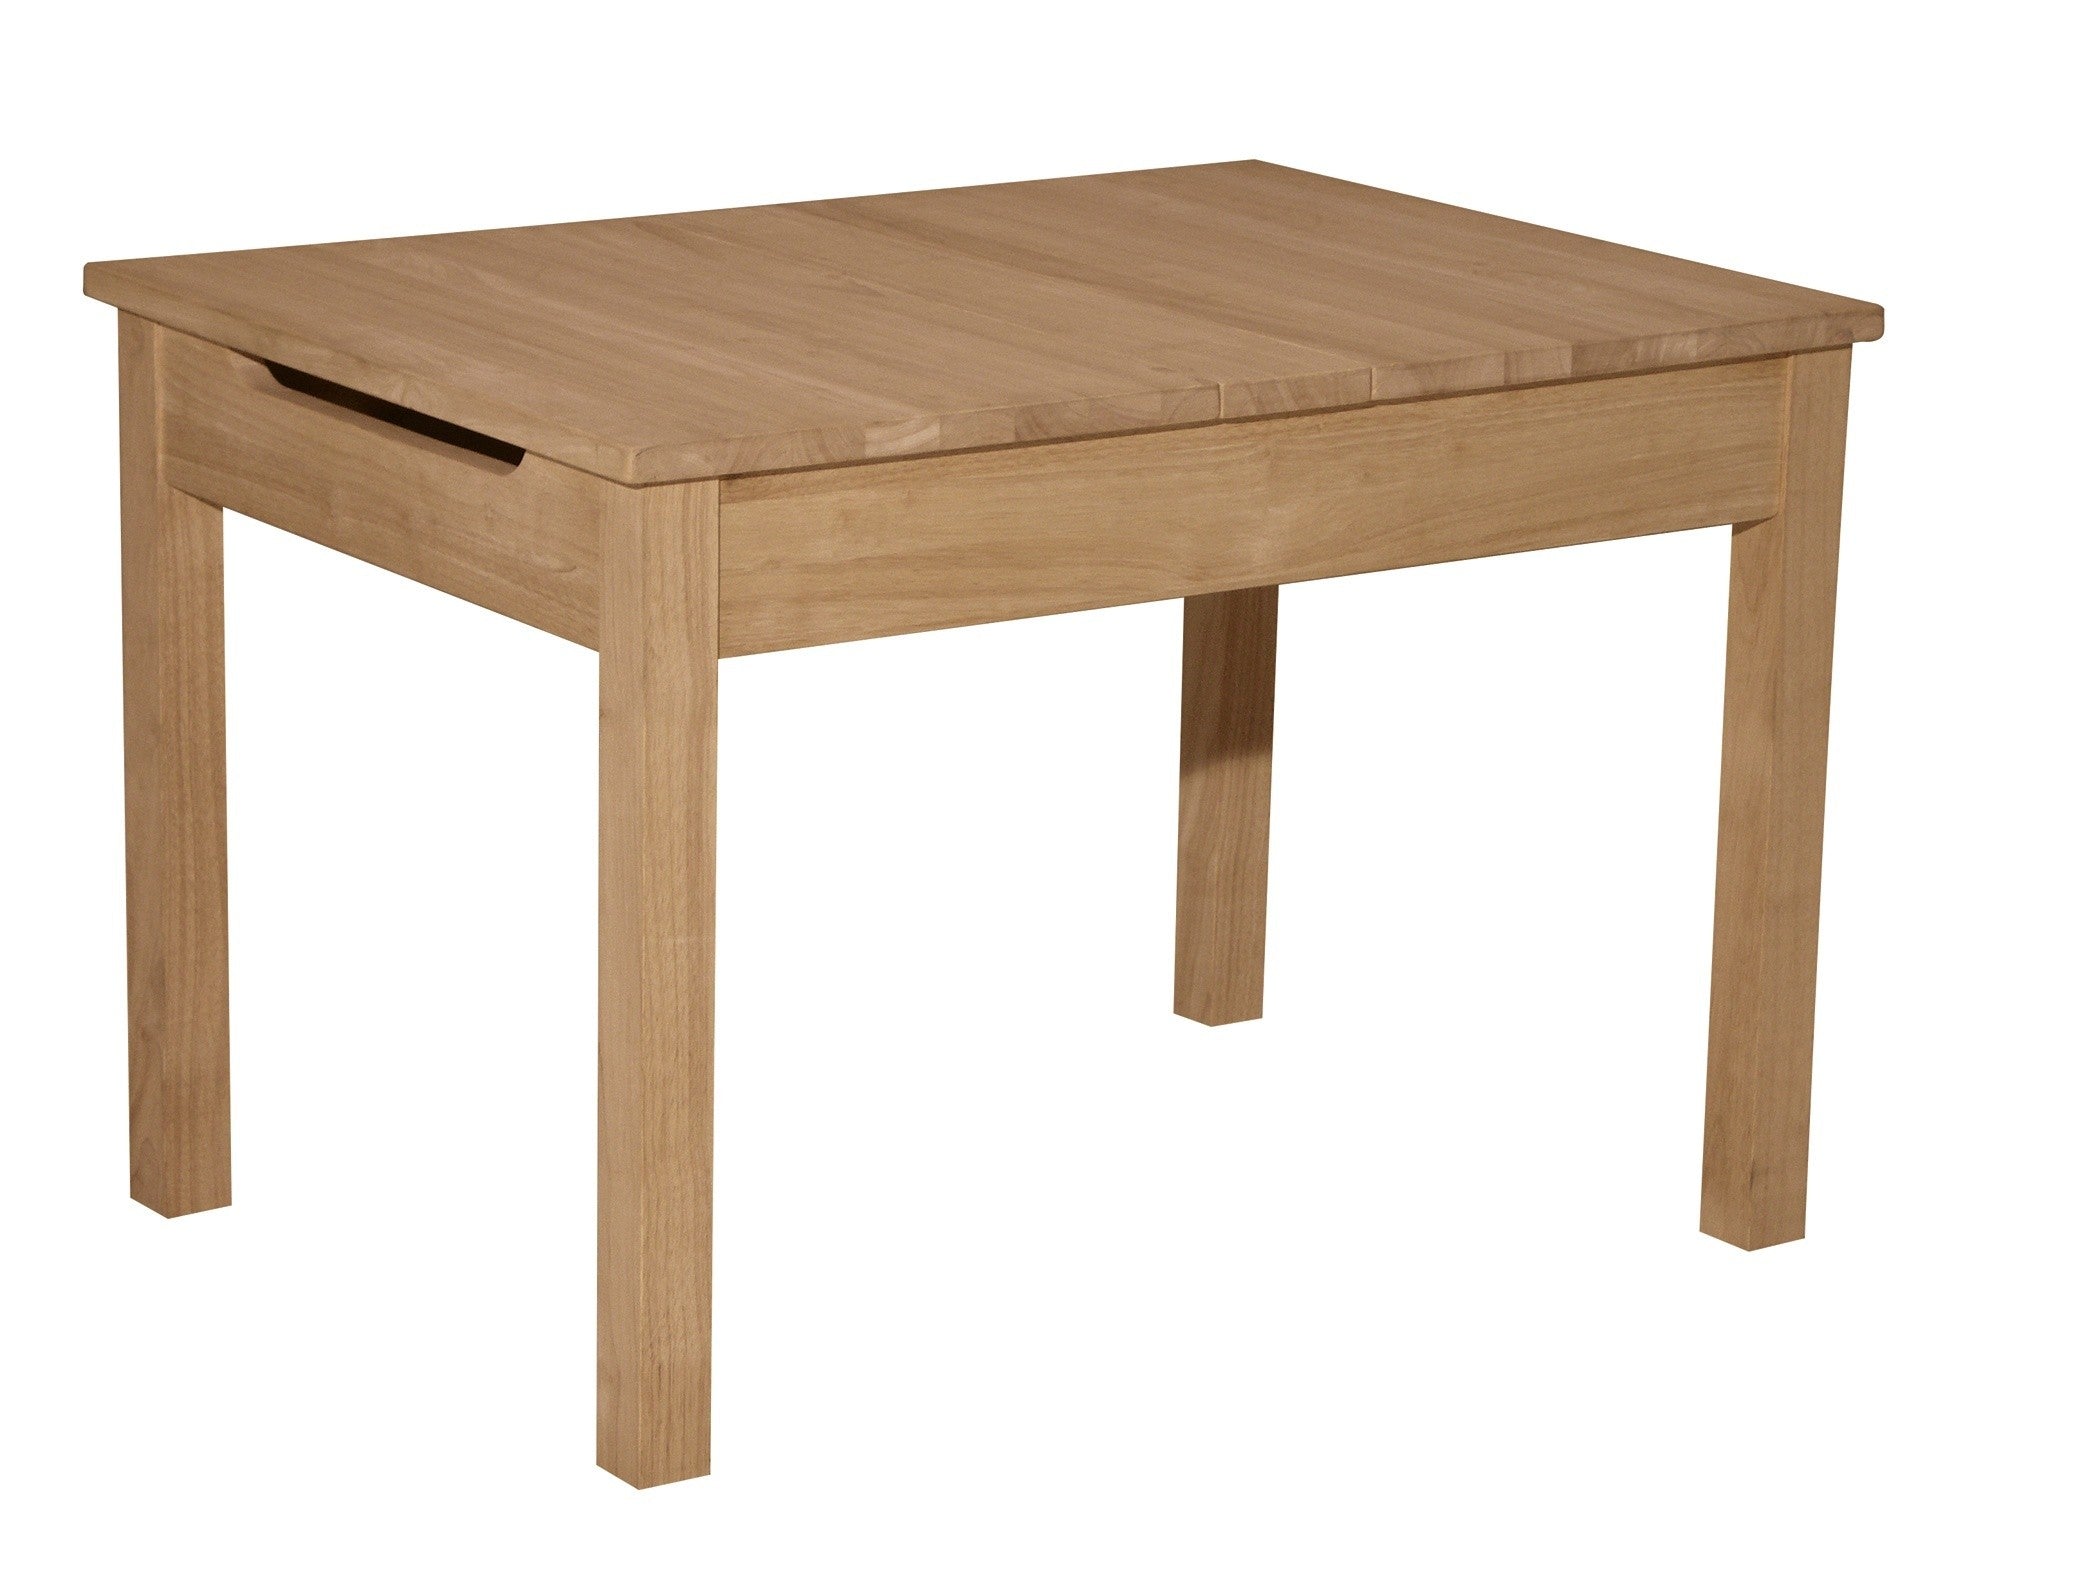 [32 Inch] Kid's Table with Lift Up Top